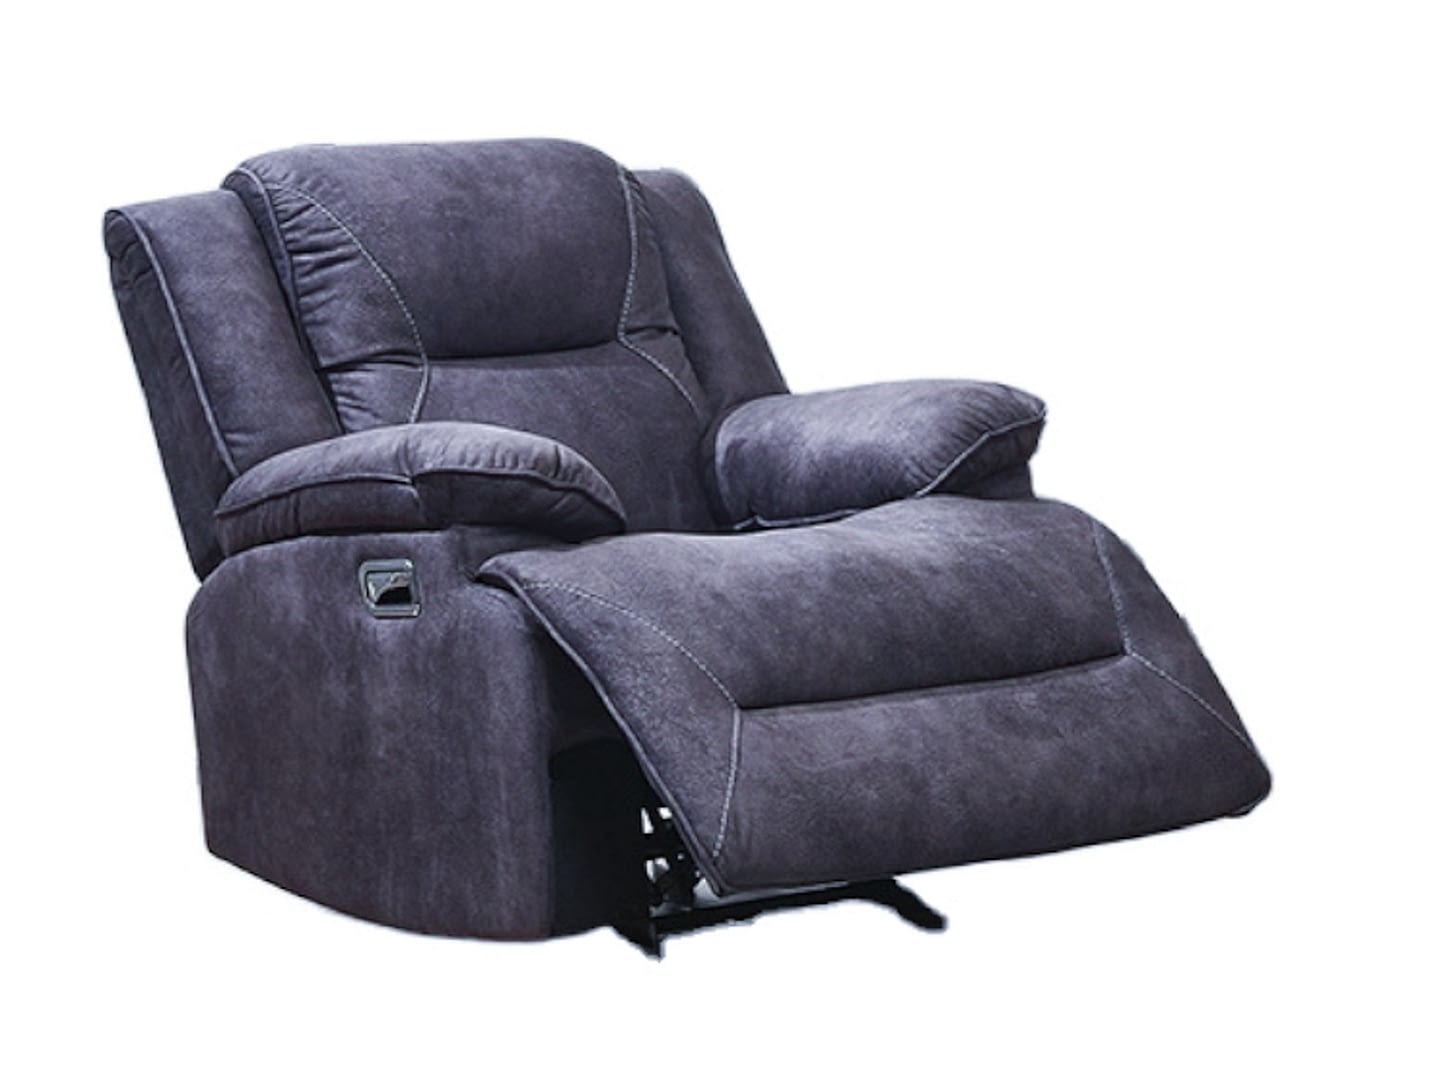 IRVING Recliner Chair - Zoom